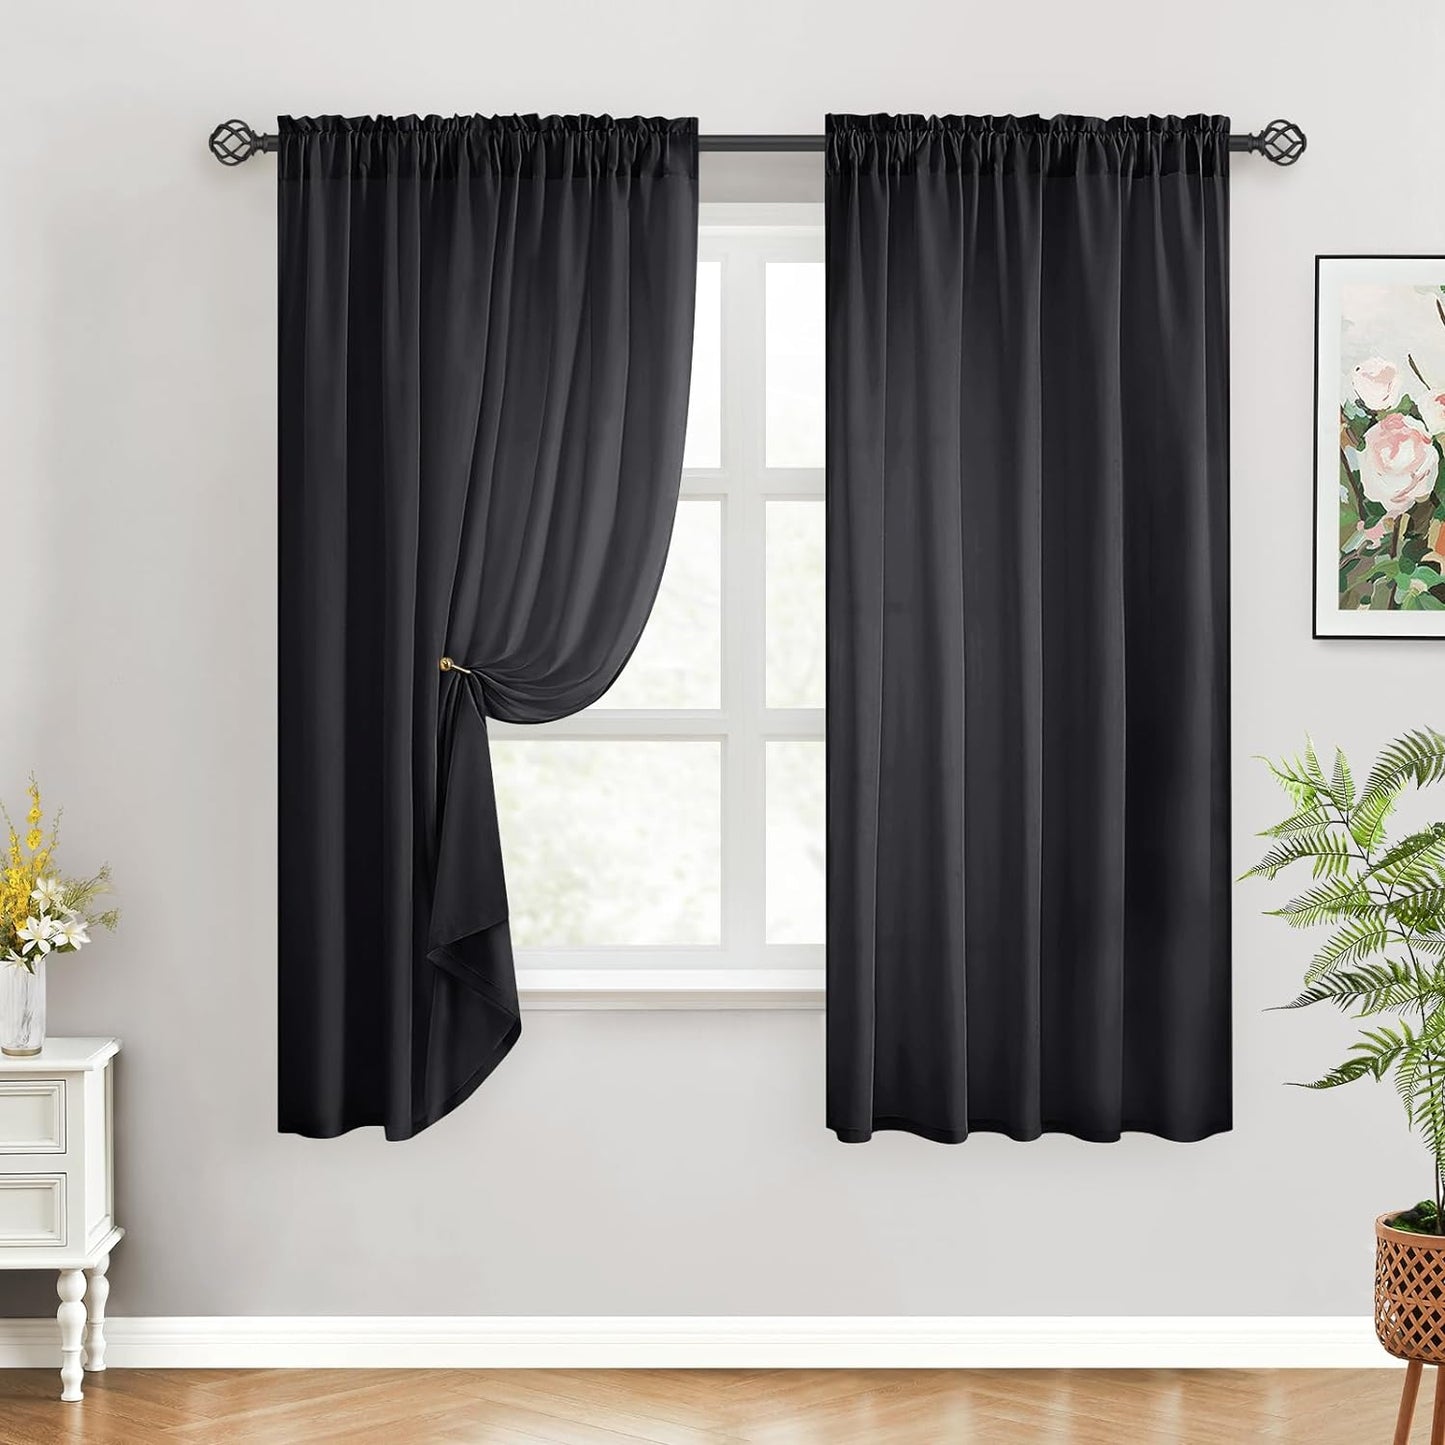 HOMEIDEAS Non-See-Through White Privacy Sheer Curtains 52 X 84 Inches Long 2 Panels Semi Sheer Curtains Light Filtering Window Curtains Drapes for Bedroom Living Room  HOMEIDEAS Black W52" X L45" 